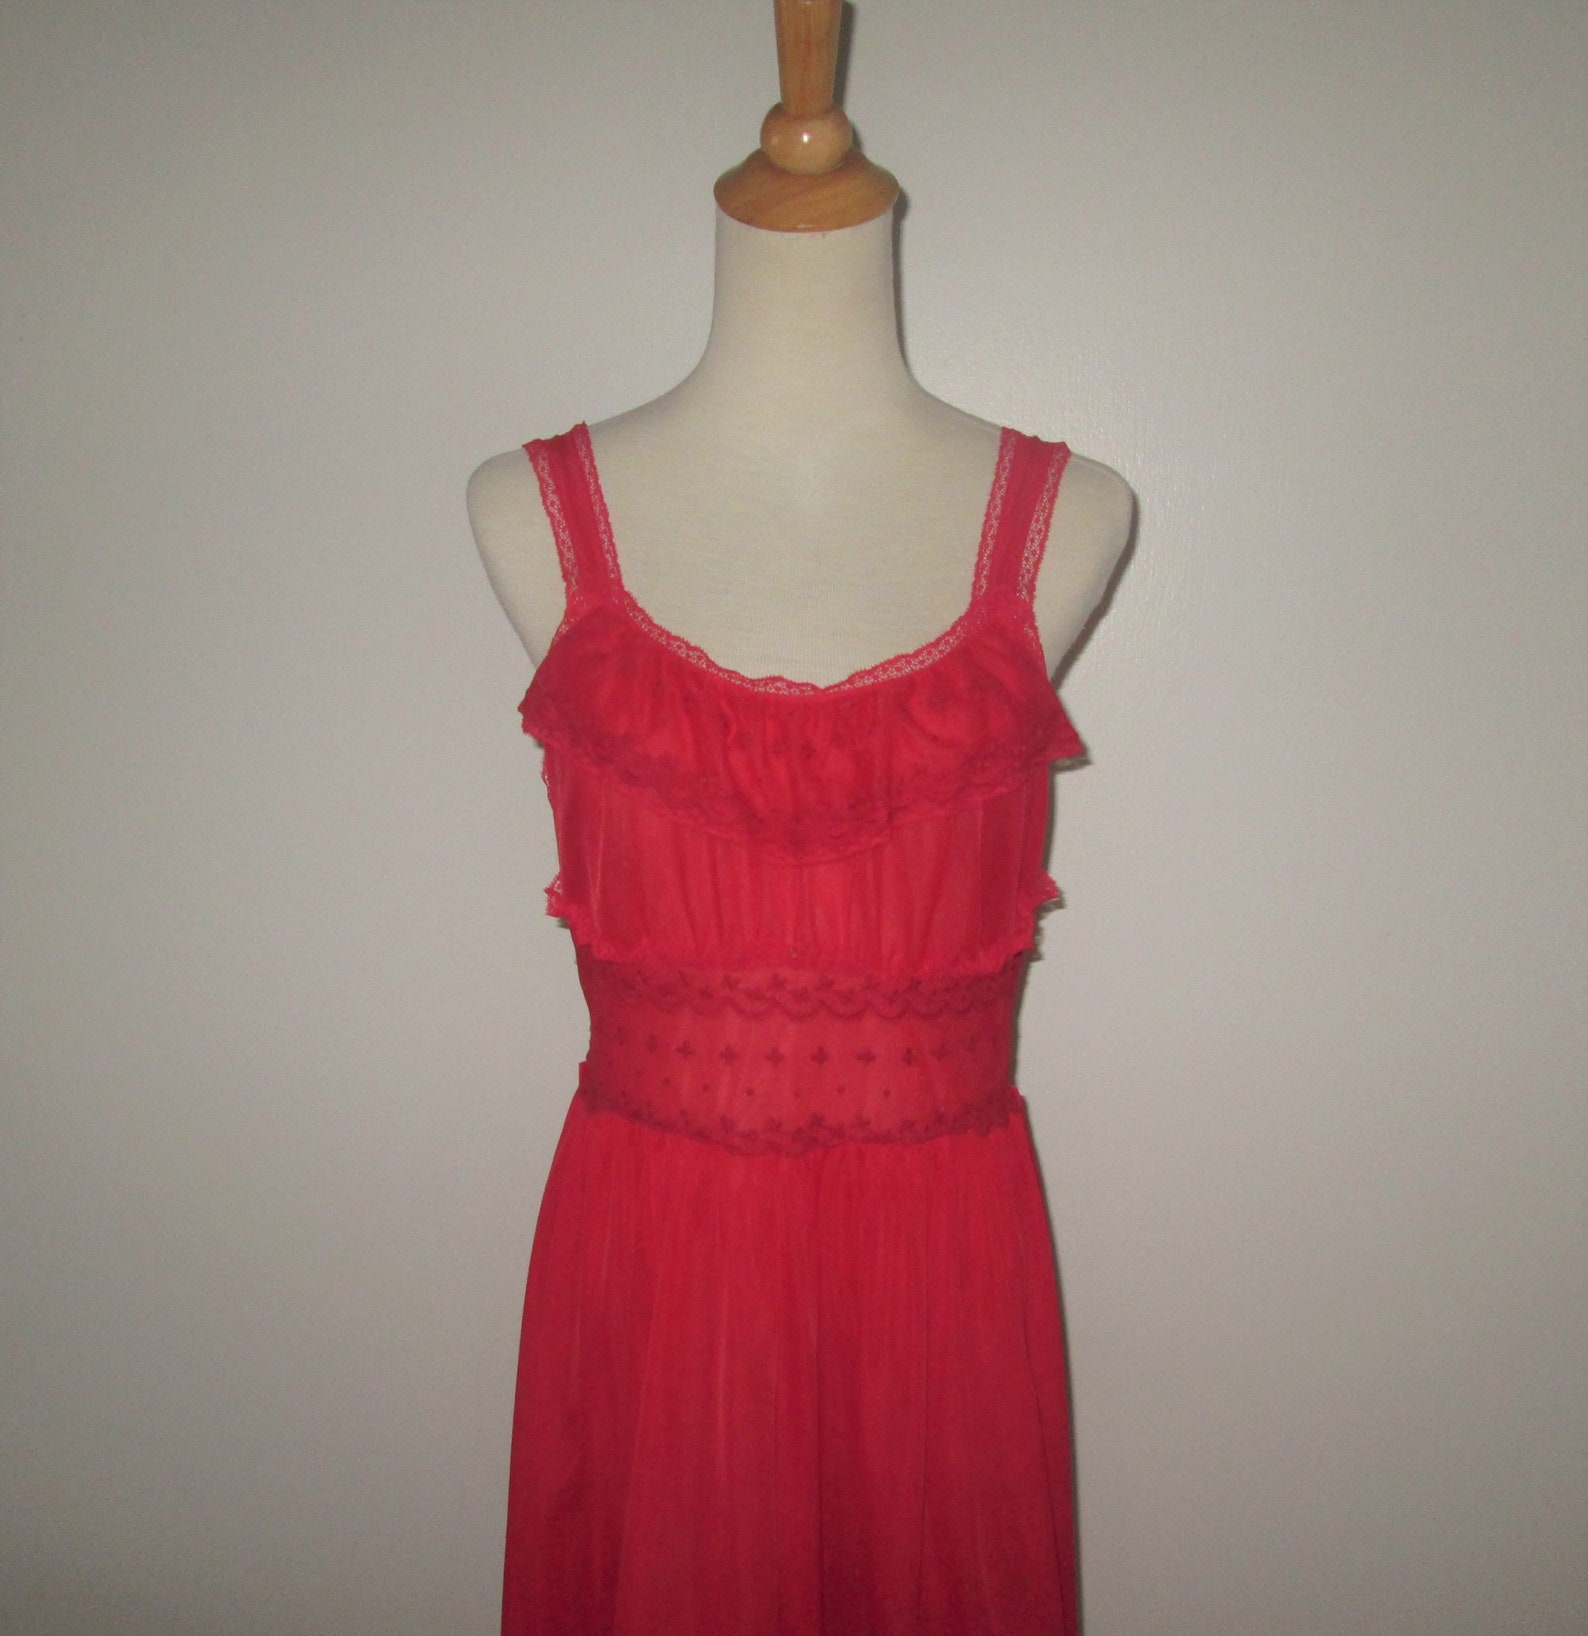 Vintage 1950s Red Nightgown With Lace Embroidered Accents by - Etsy